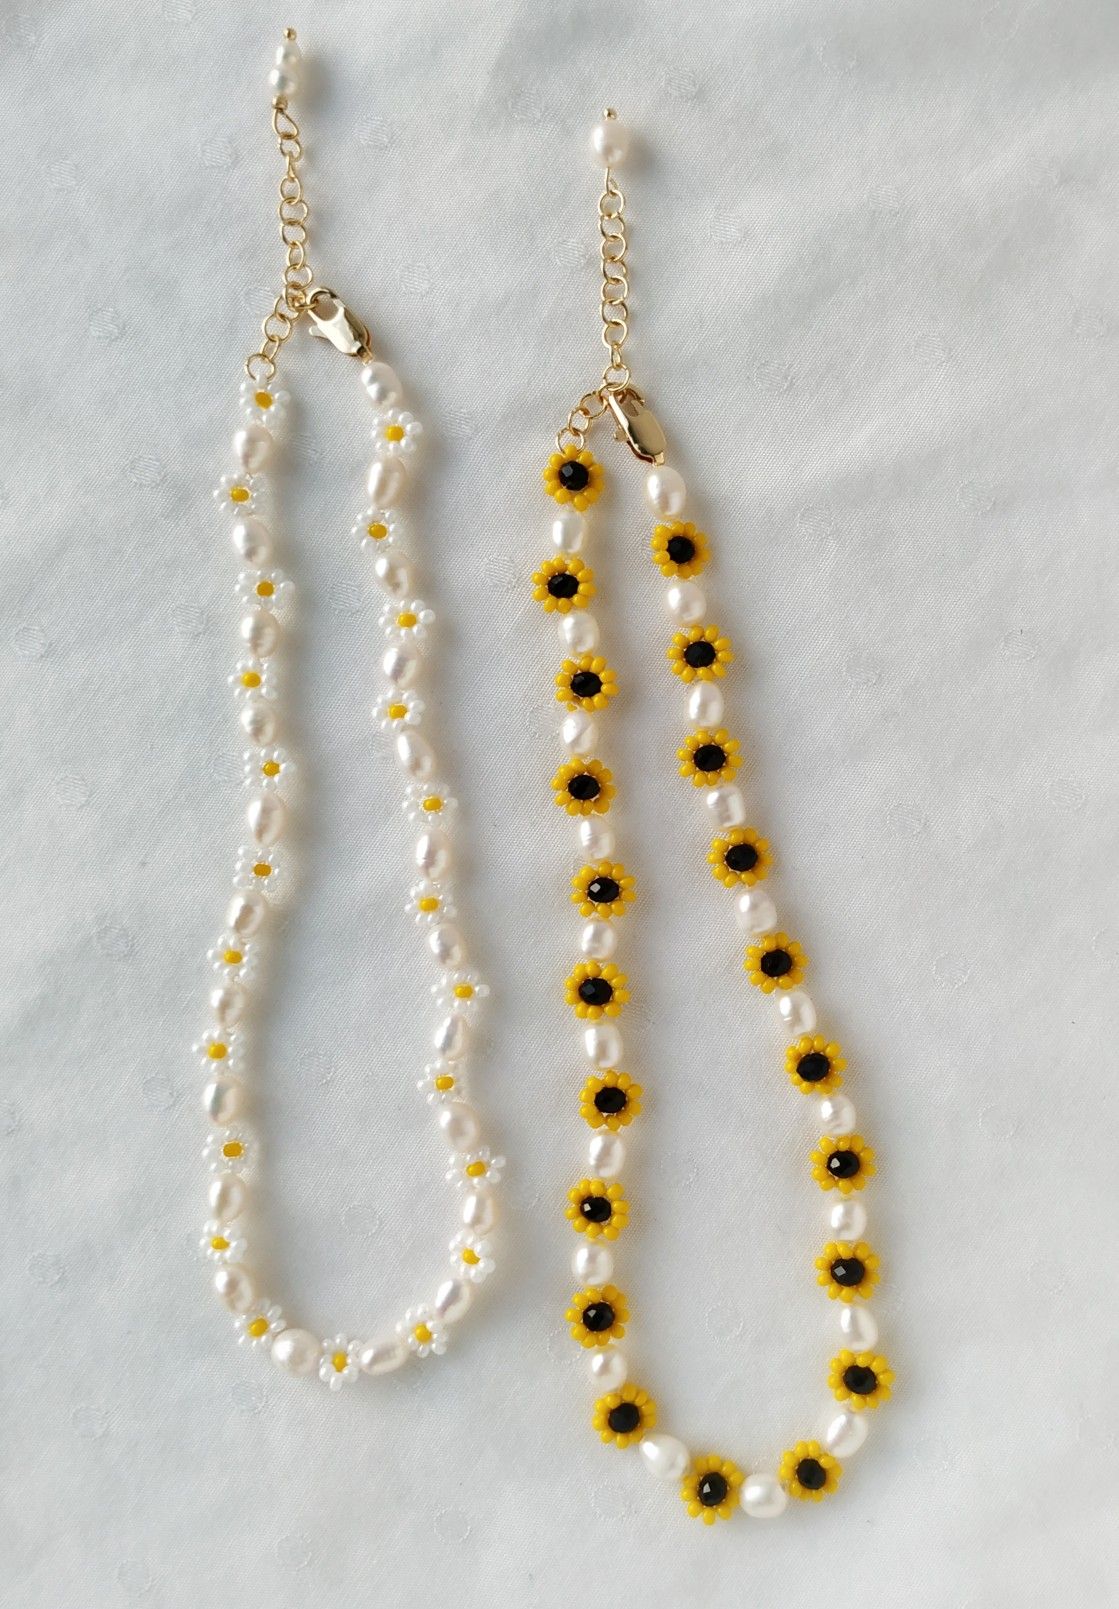 Create a statement piece with handmade necklaces